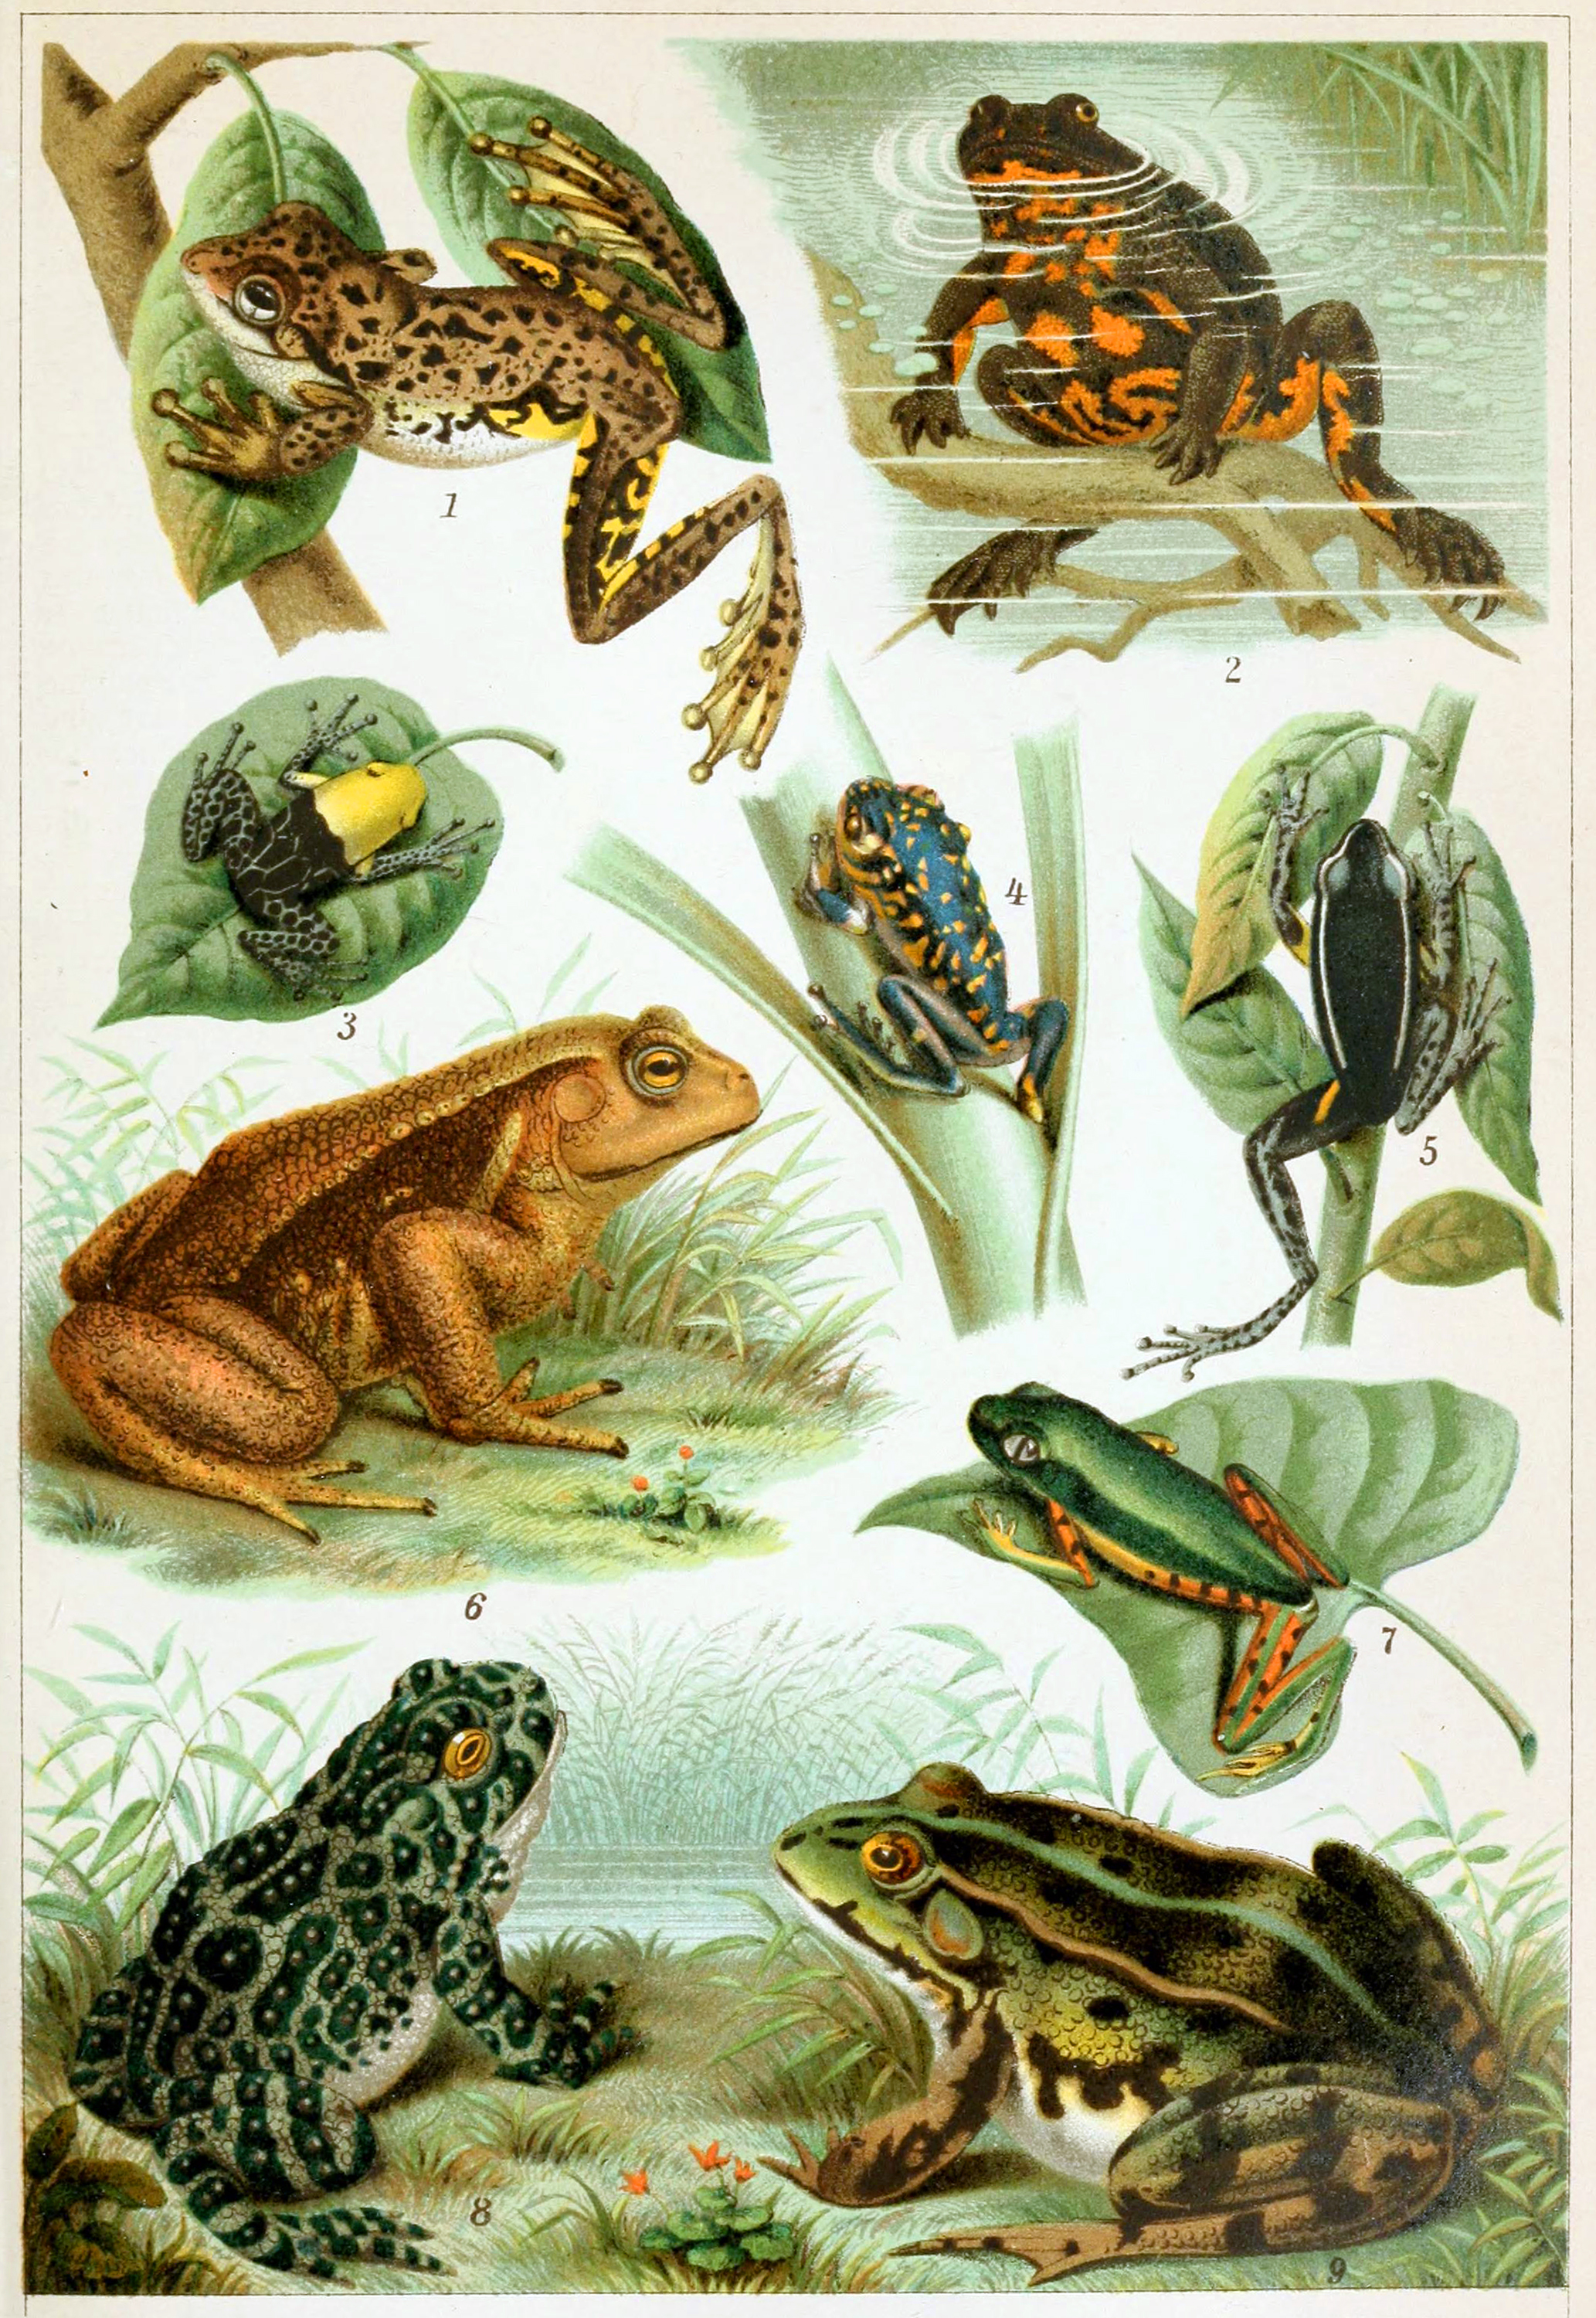 What is the name of the original ancestor of frogs?